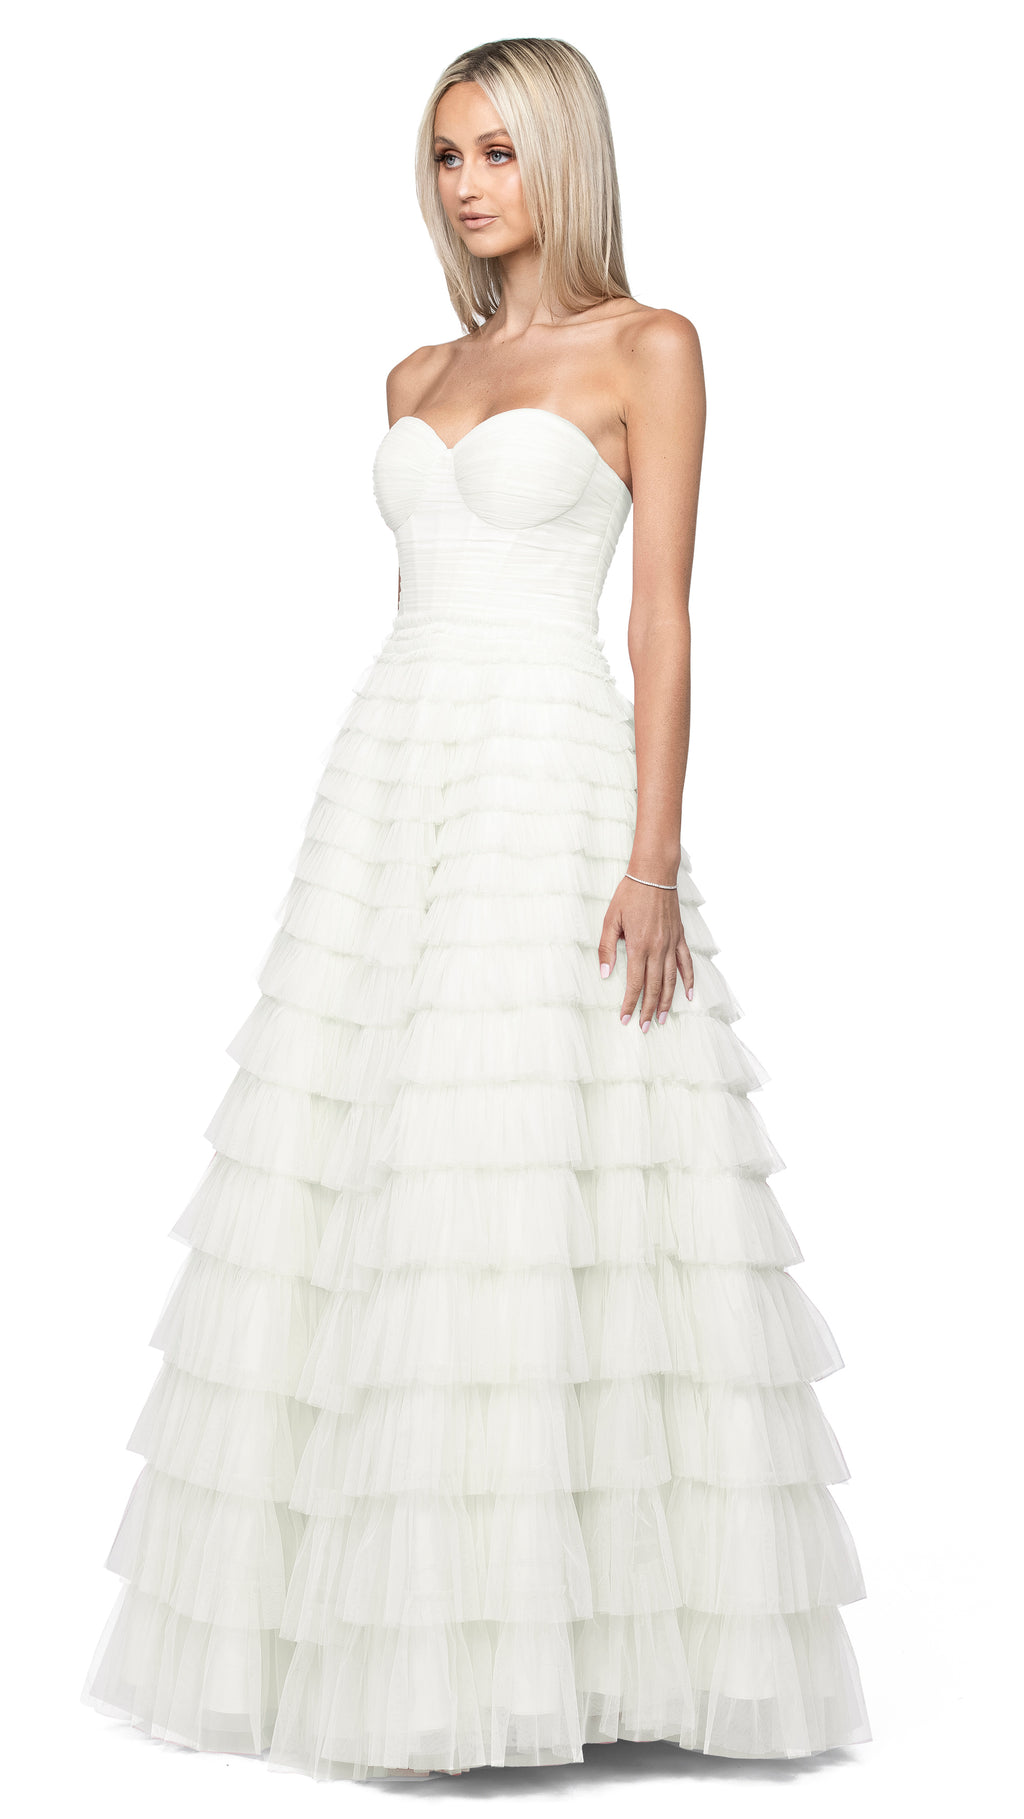 Serenity Sweetheart Strapless Ball Gown in White SIDE - PREORDER